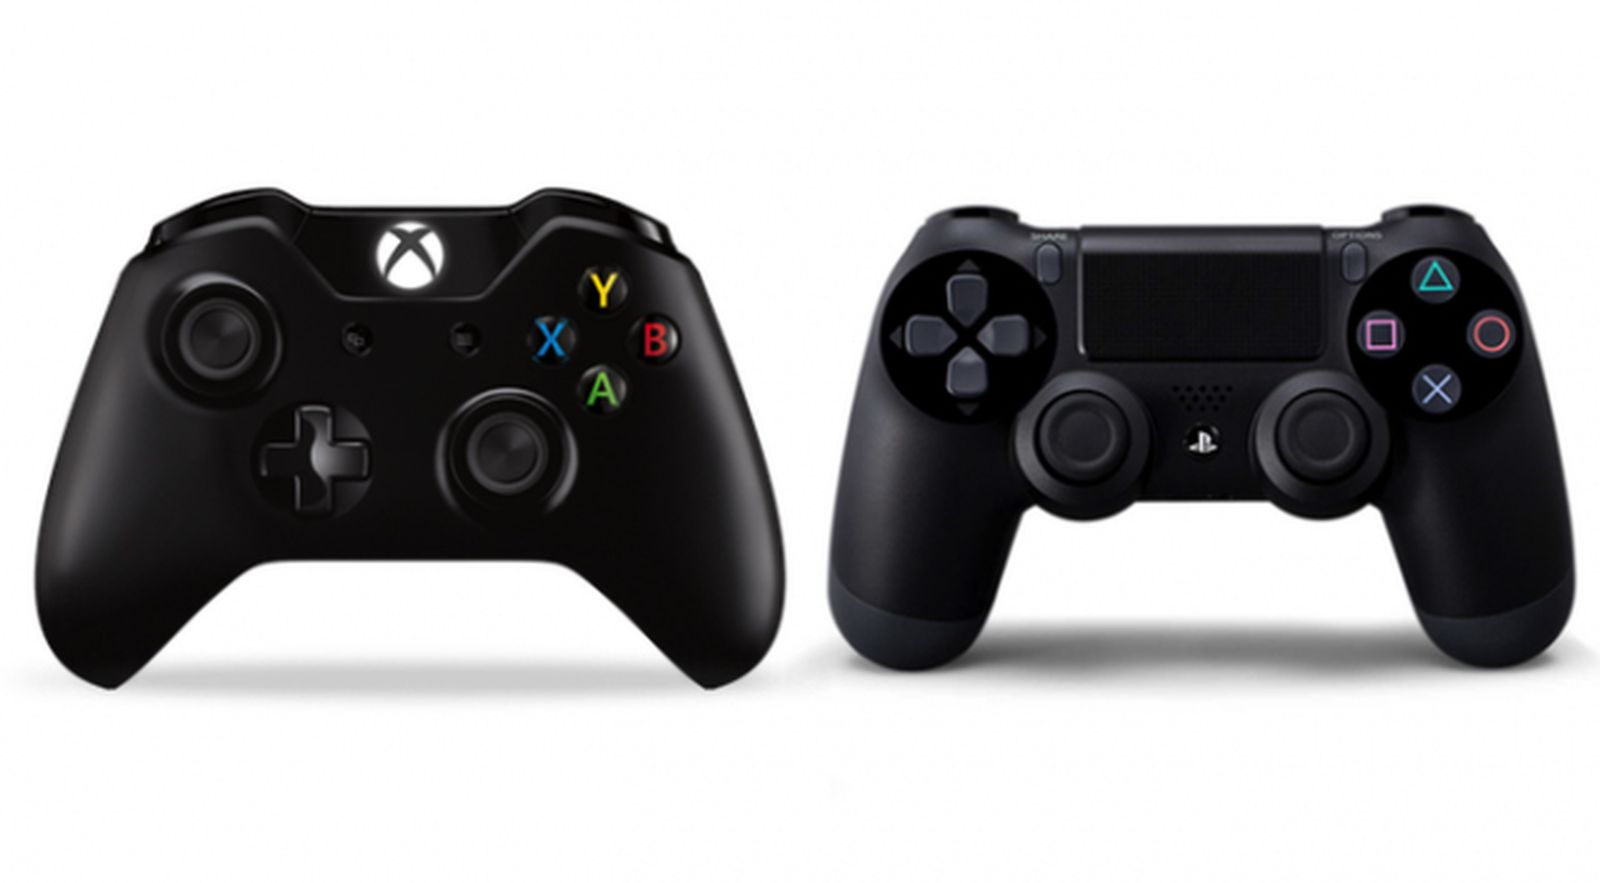 PS4 DualShock 4 controller is compatible with the Xbox 360 - Xbox One next?